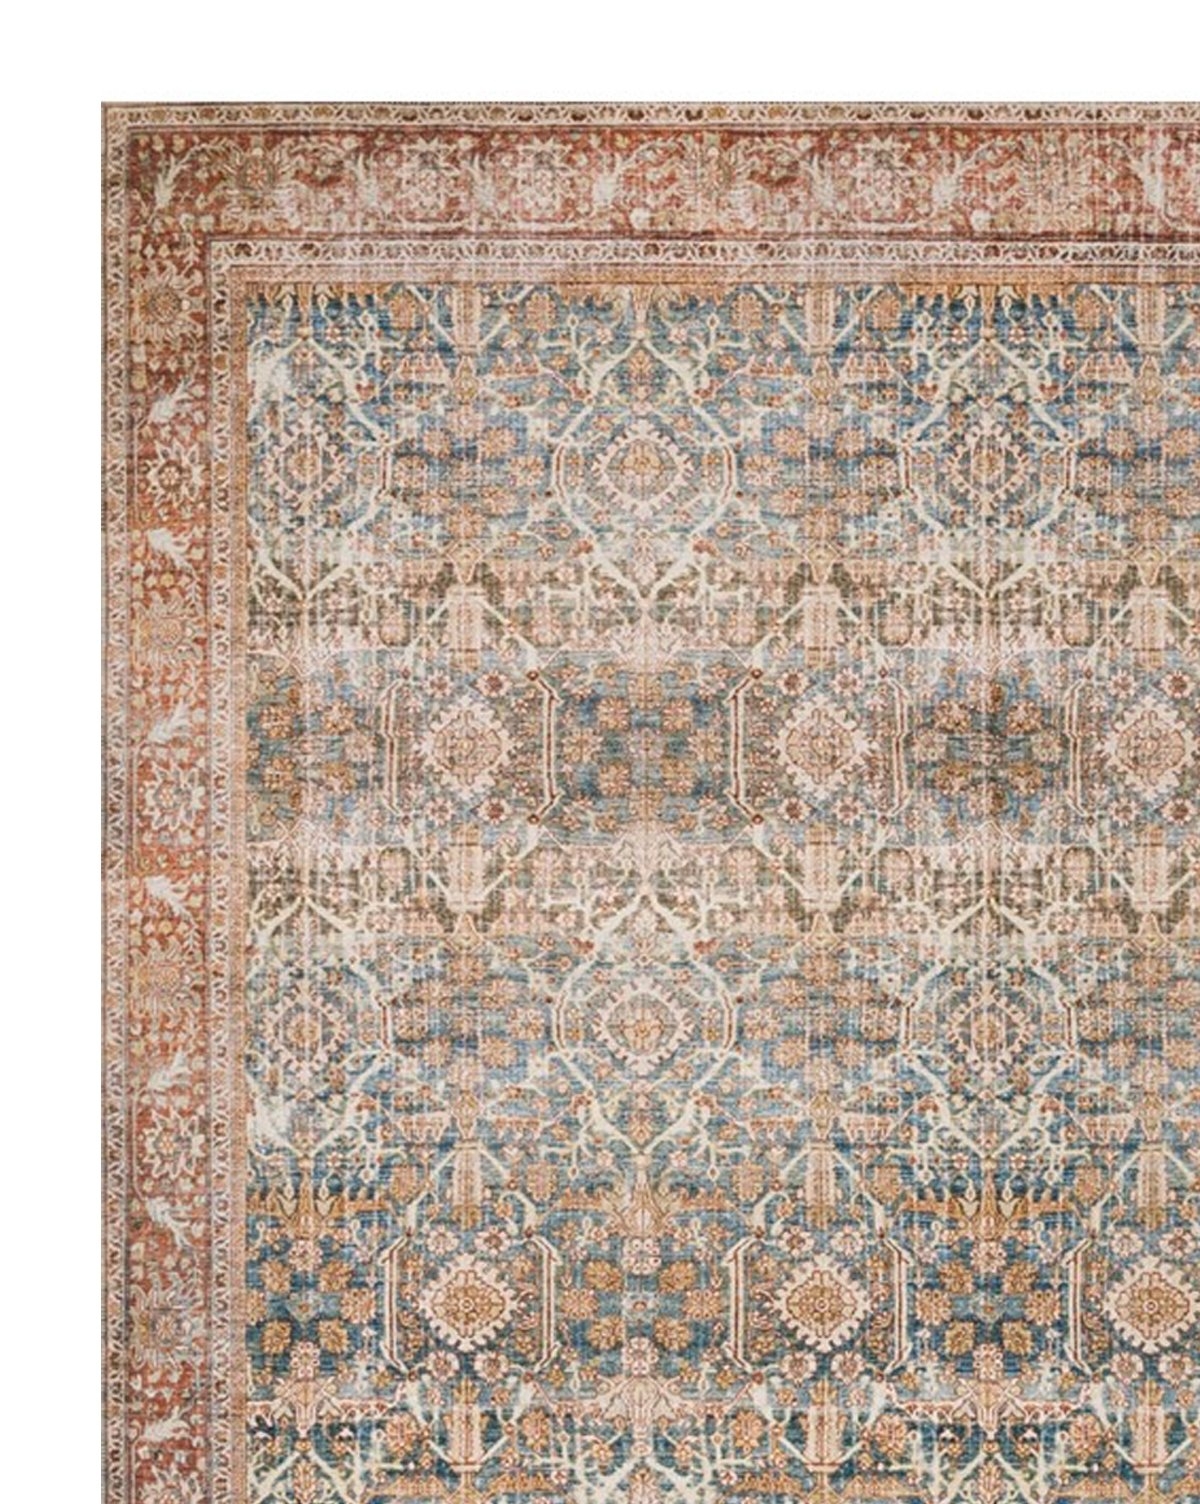 TUNIS PATTERNED RUG, 2'6" x 12' - Image 1